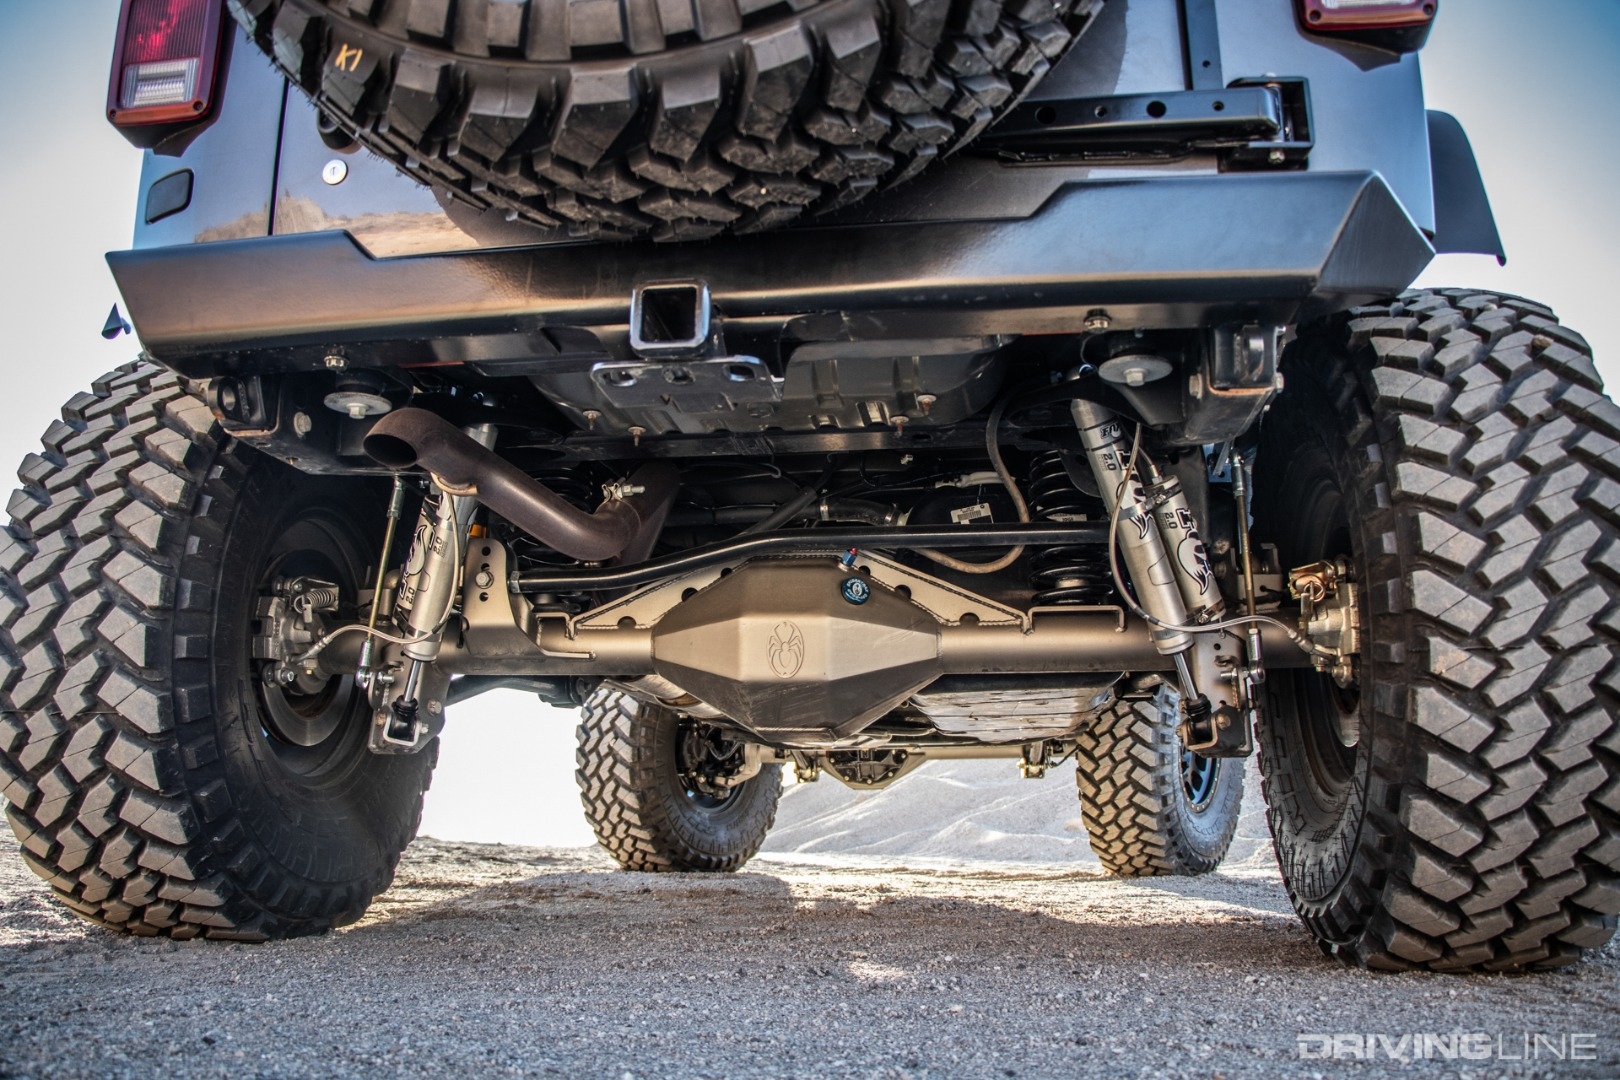 Lower back shot of Jeep axles and tires.